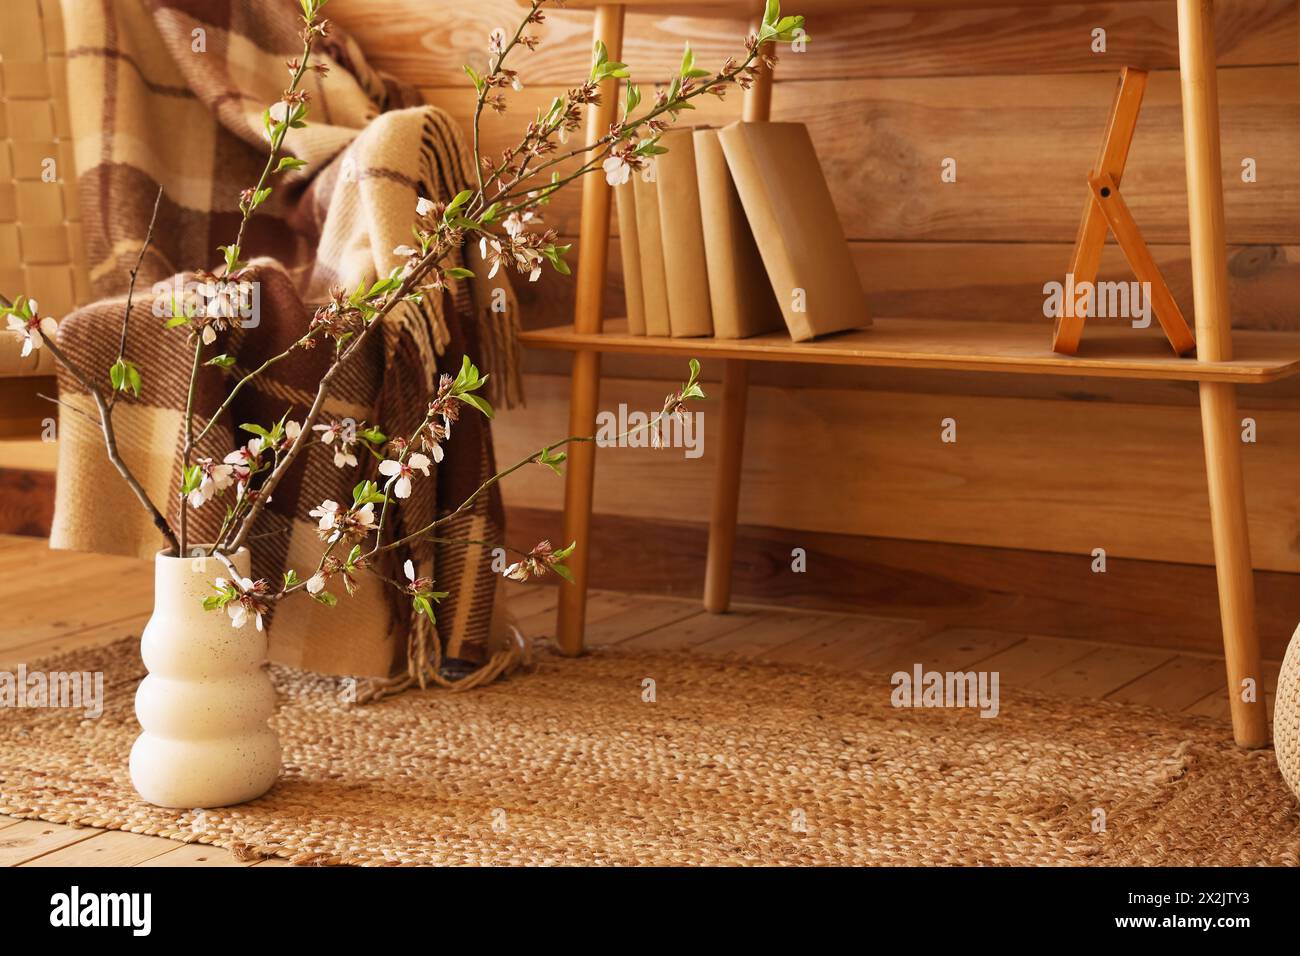 Comfy armchair, shelving unit and vase with blooming branches near wooden wall in living room Stock Photo